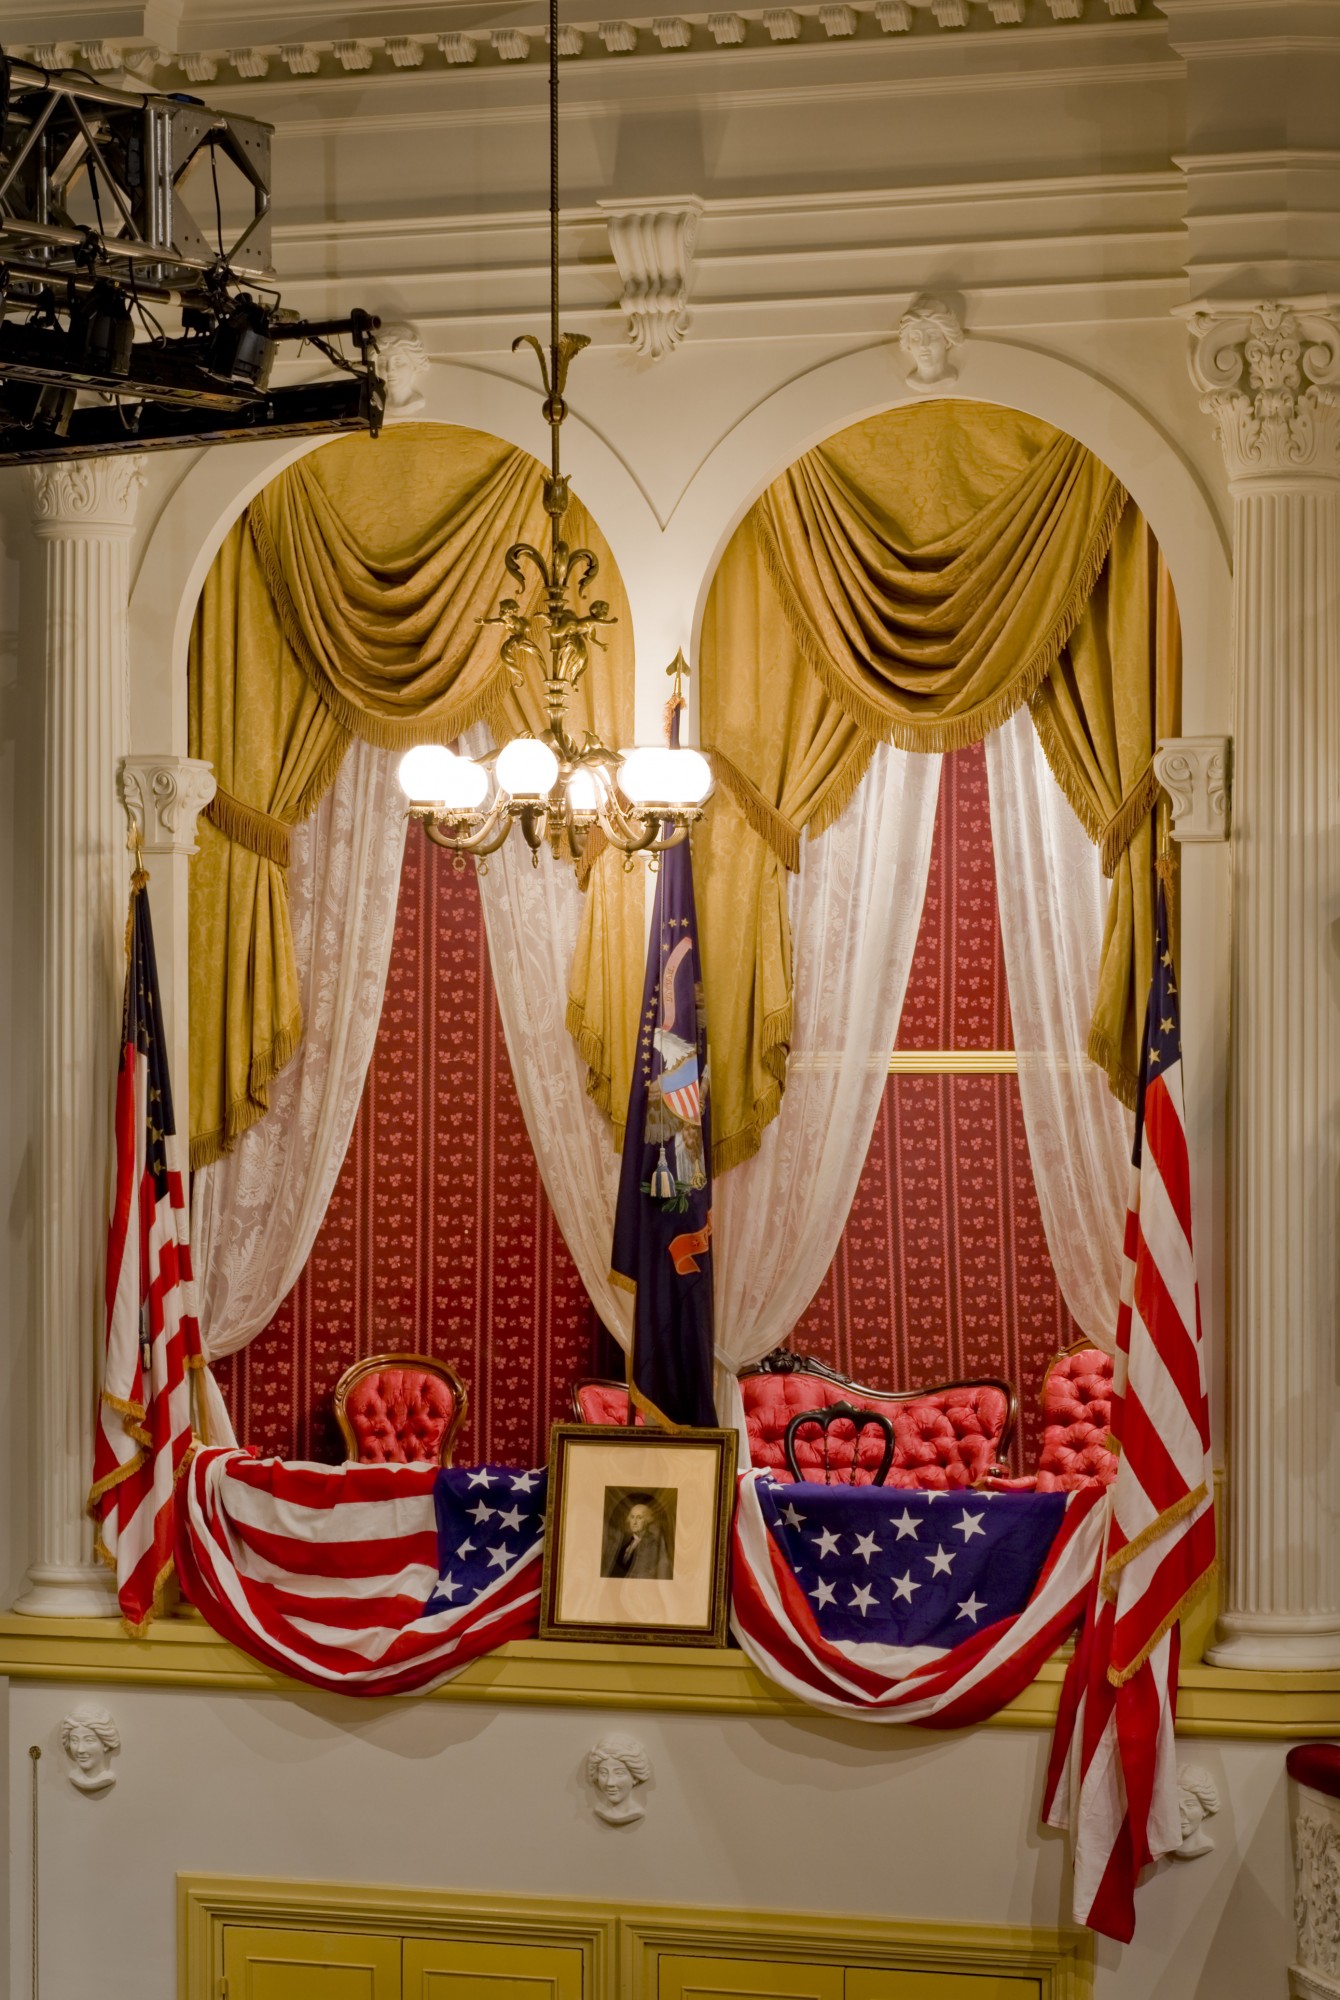 Photo of the Ford's Theatre Presidential Box. The Box is decorated by American flags on either side and on the balcony railing below. In the center is a portrait of George Washington. 